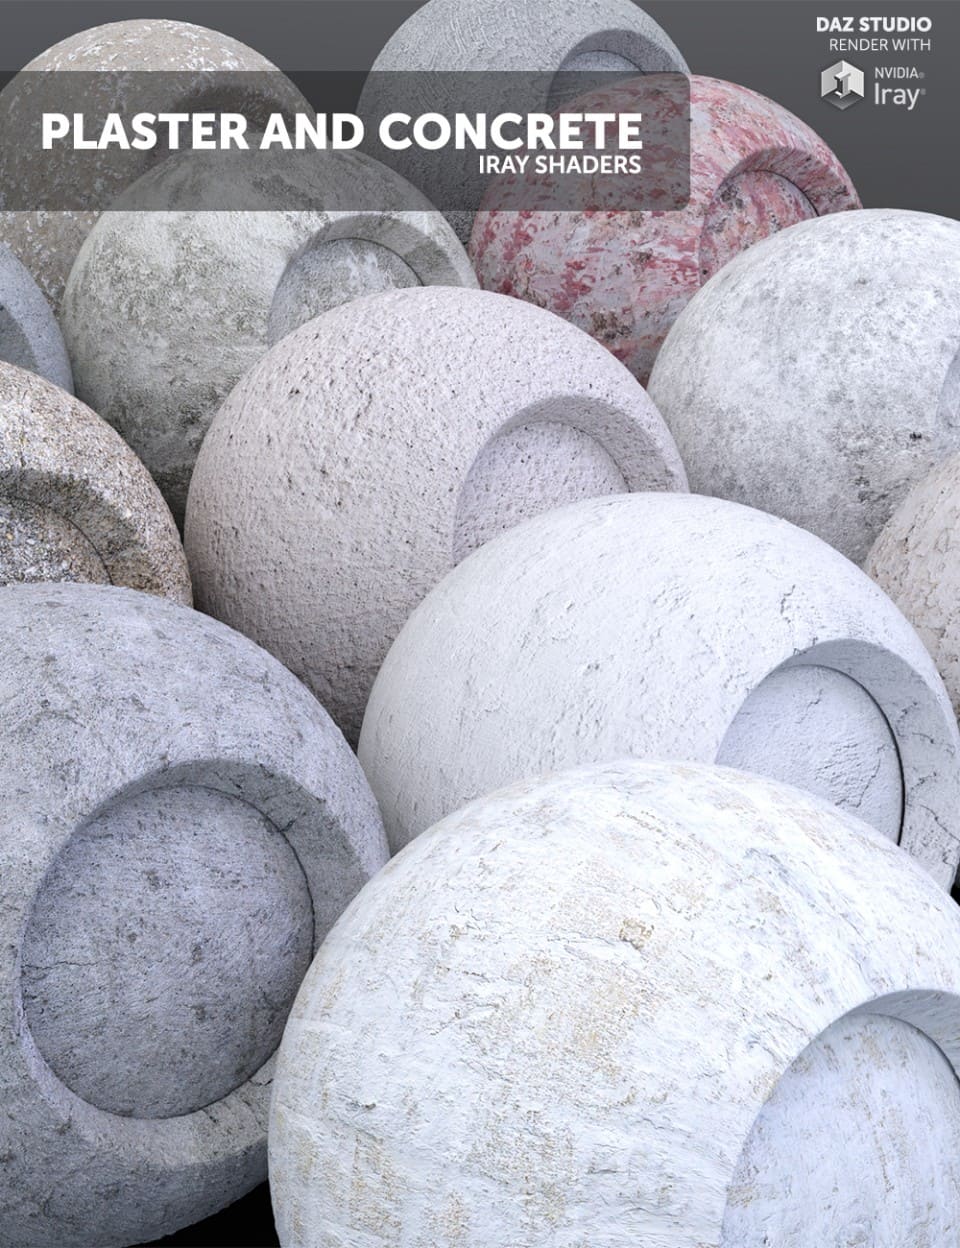 Plaster and Concrete - Iray Shaders_DAZ3D下载站